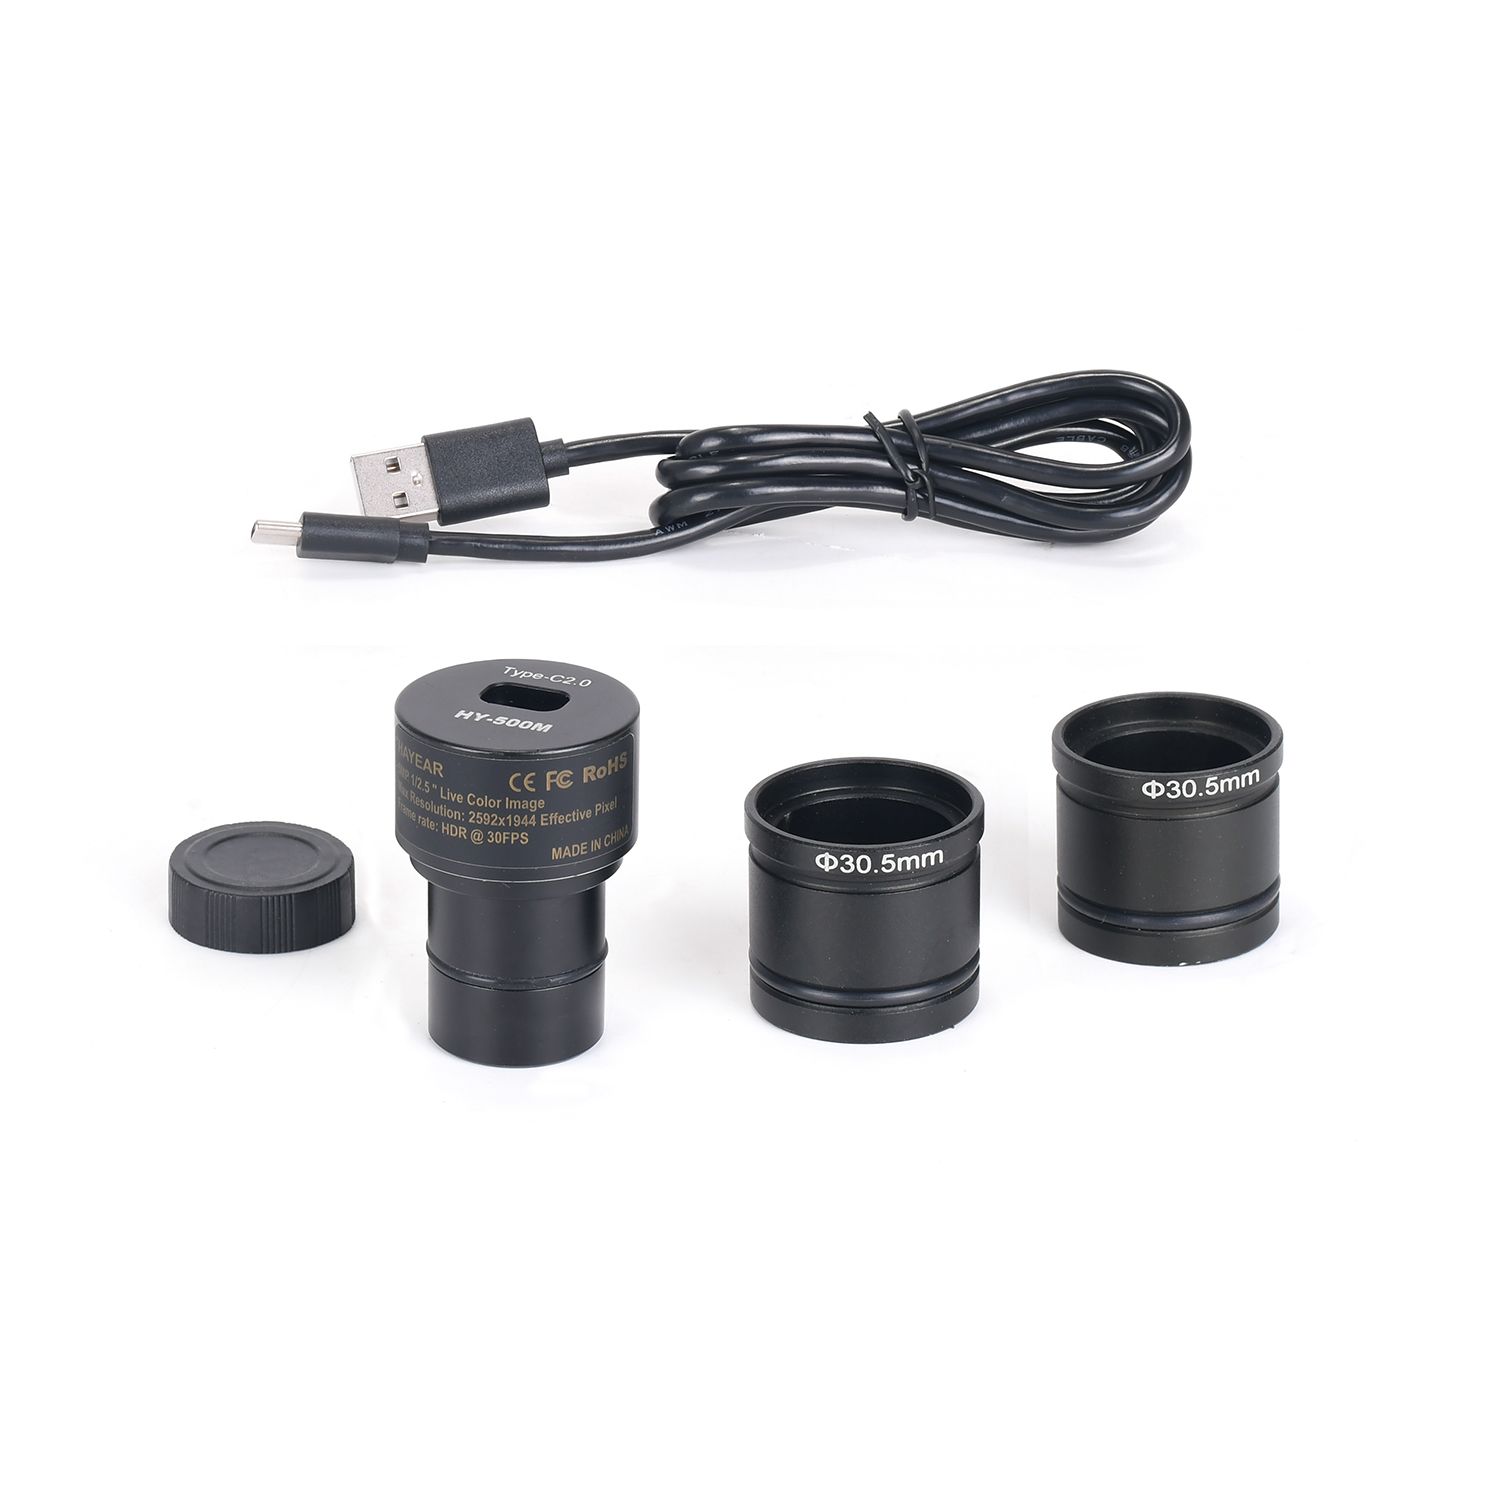 5MP Digital Microscope Eyepiece Camera Type-C USB Connection 23.2mm for Biological Microscope